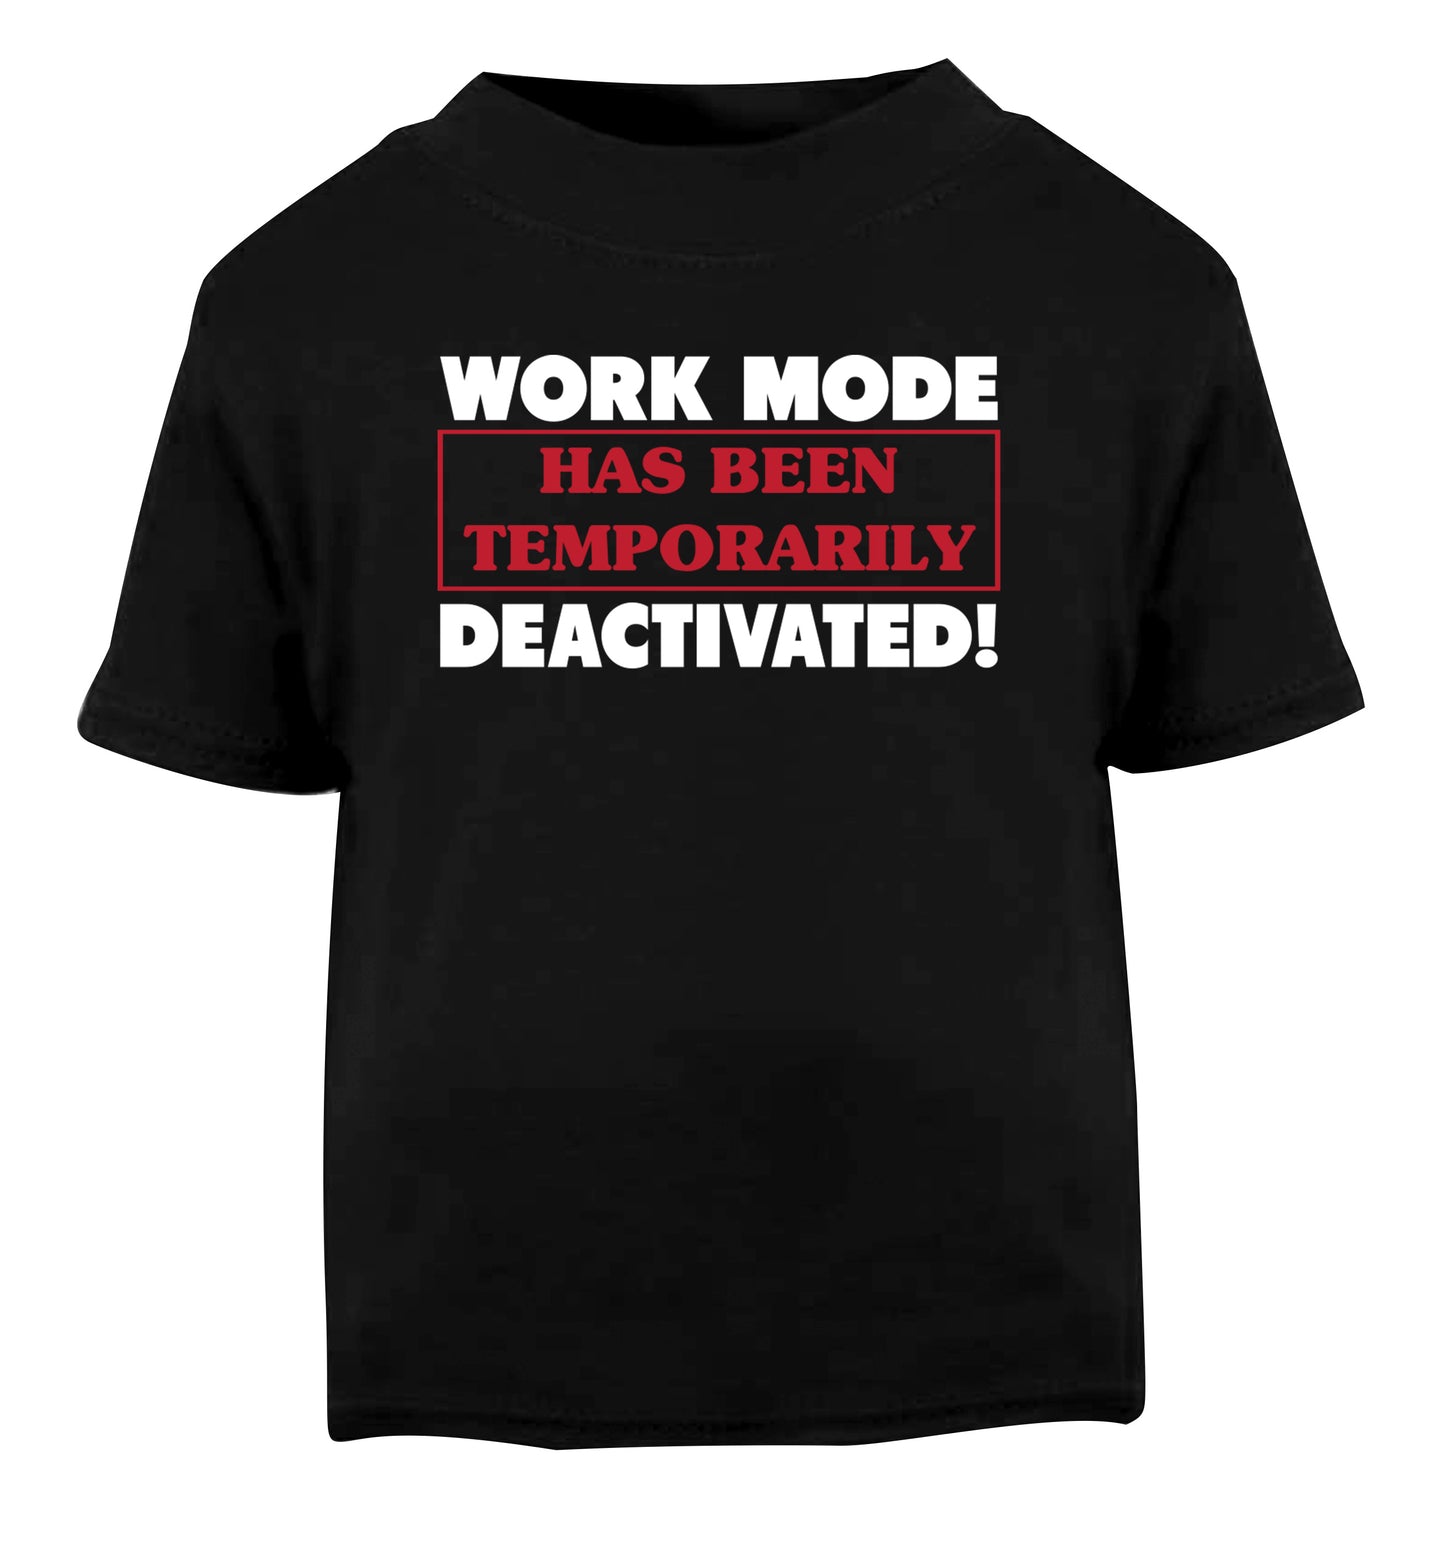 Work mode has now been temporarily deactivated Black Baby Toddler Tshirt 2 years